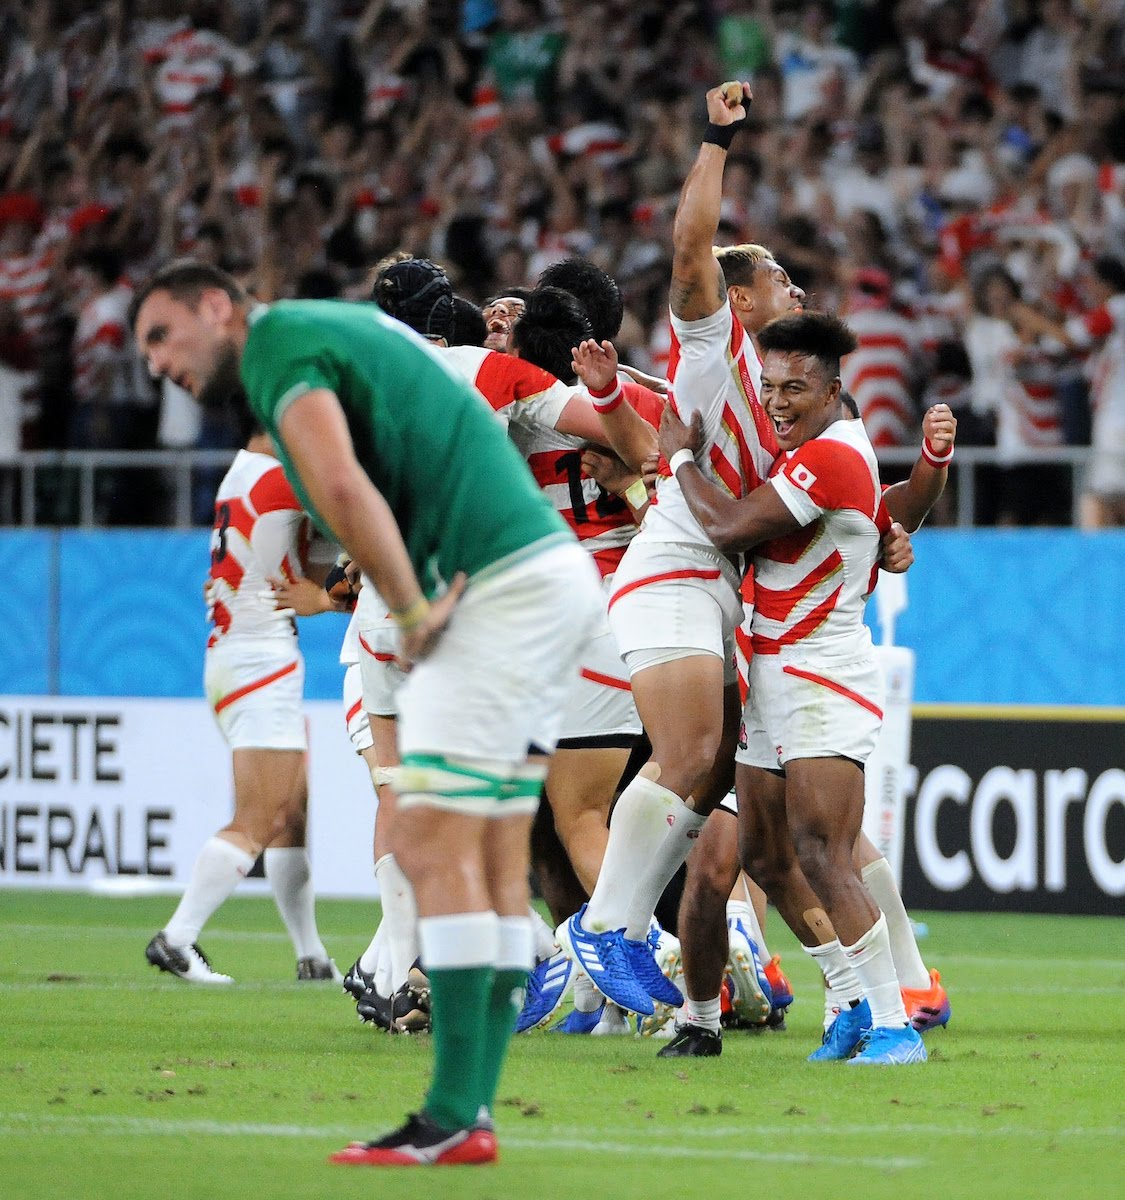 Japan celebrate scoring a try against Ireland in the 2019 Rugby World Cup 